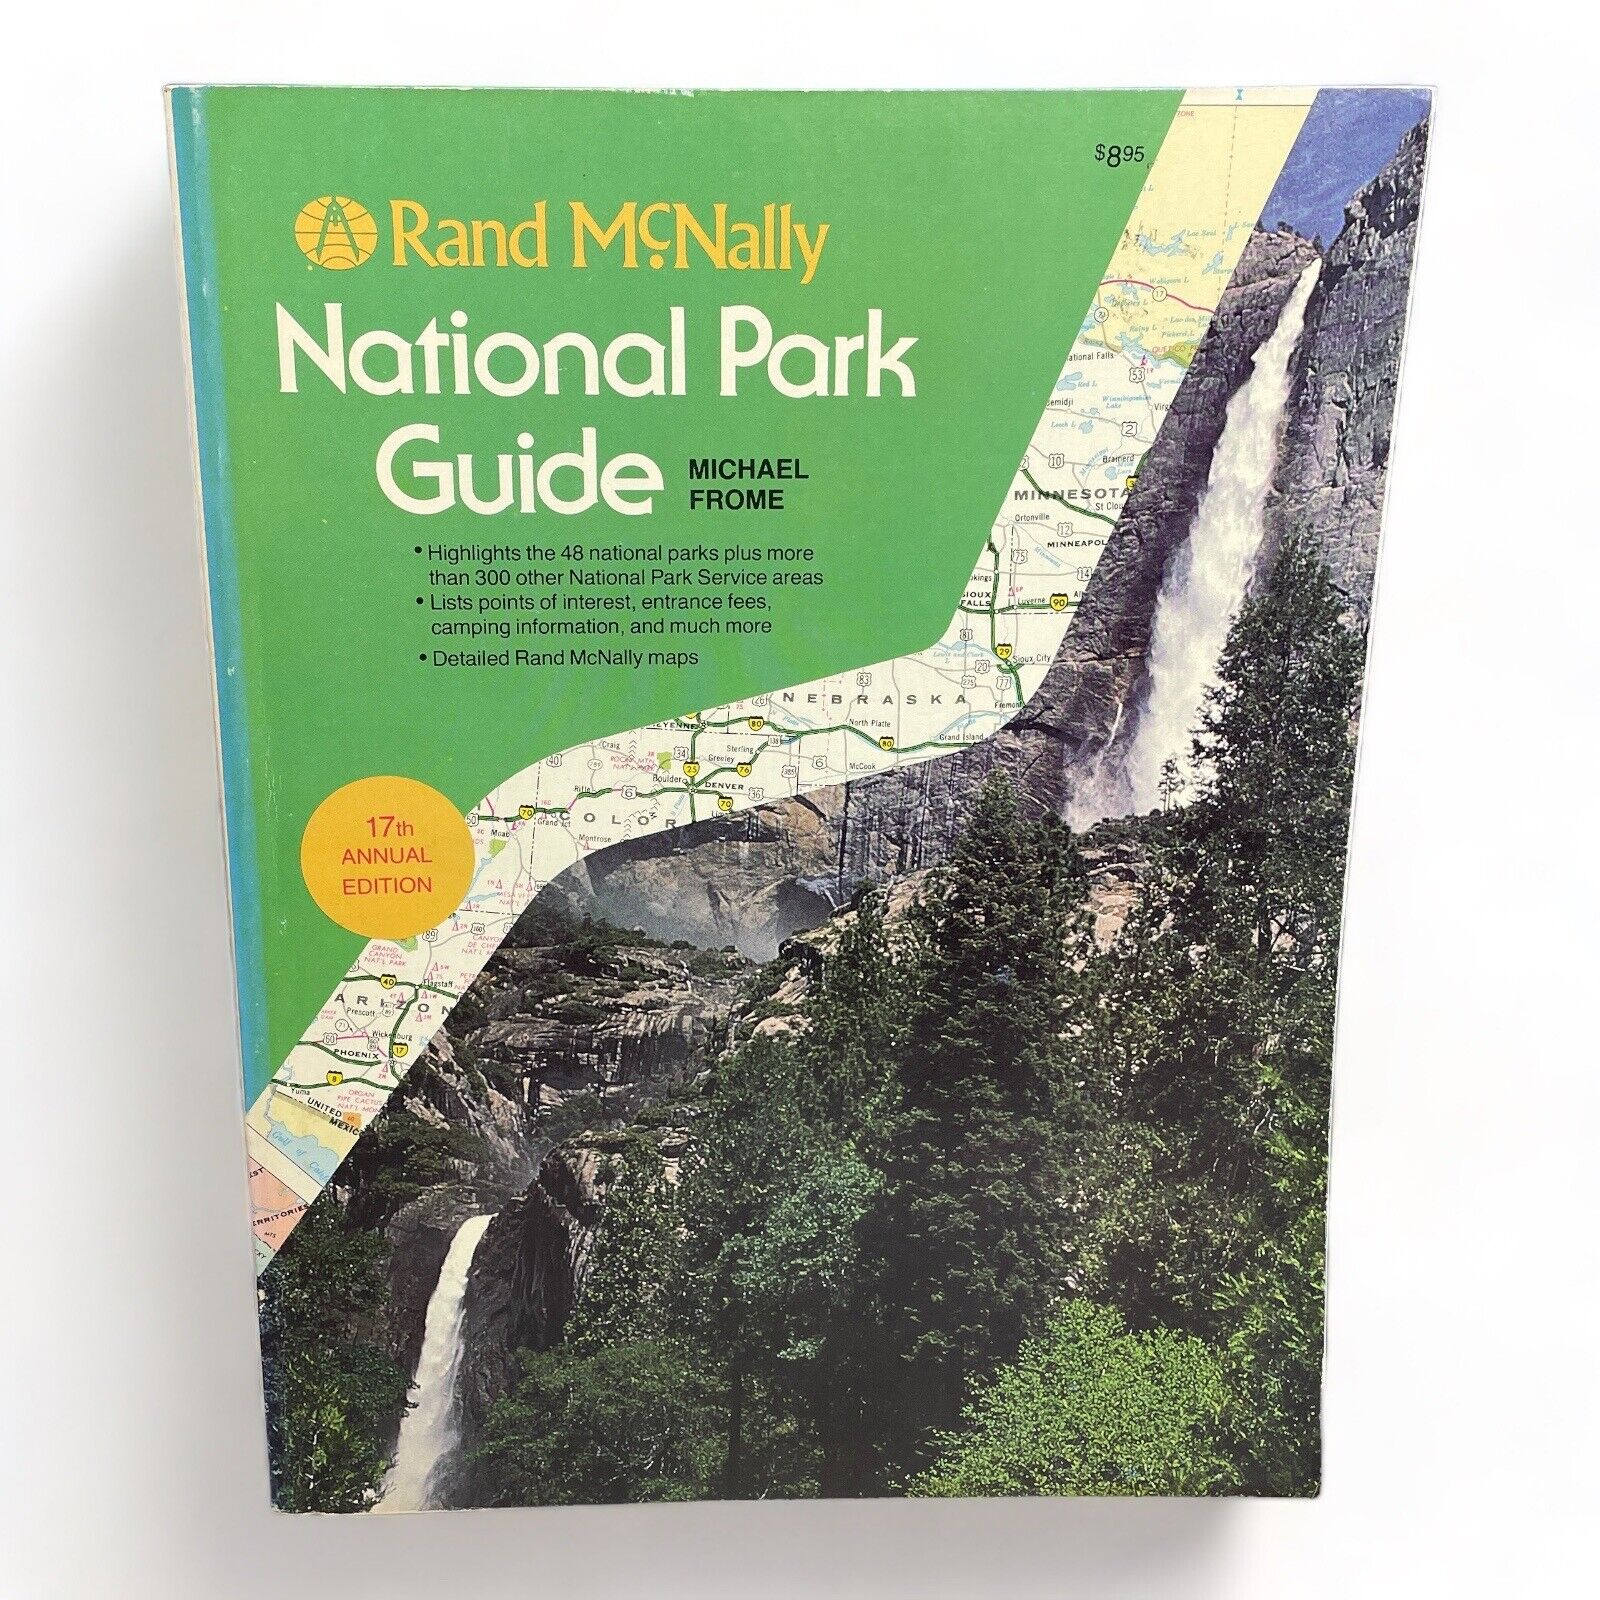 1983 National Park Guide Rand McNally 17th Edition Map Book Michael Frome PB